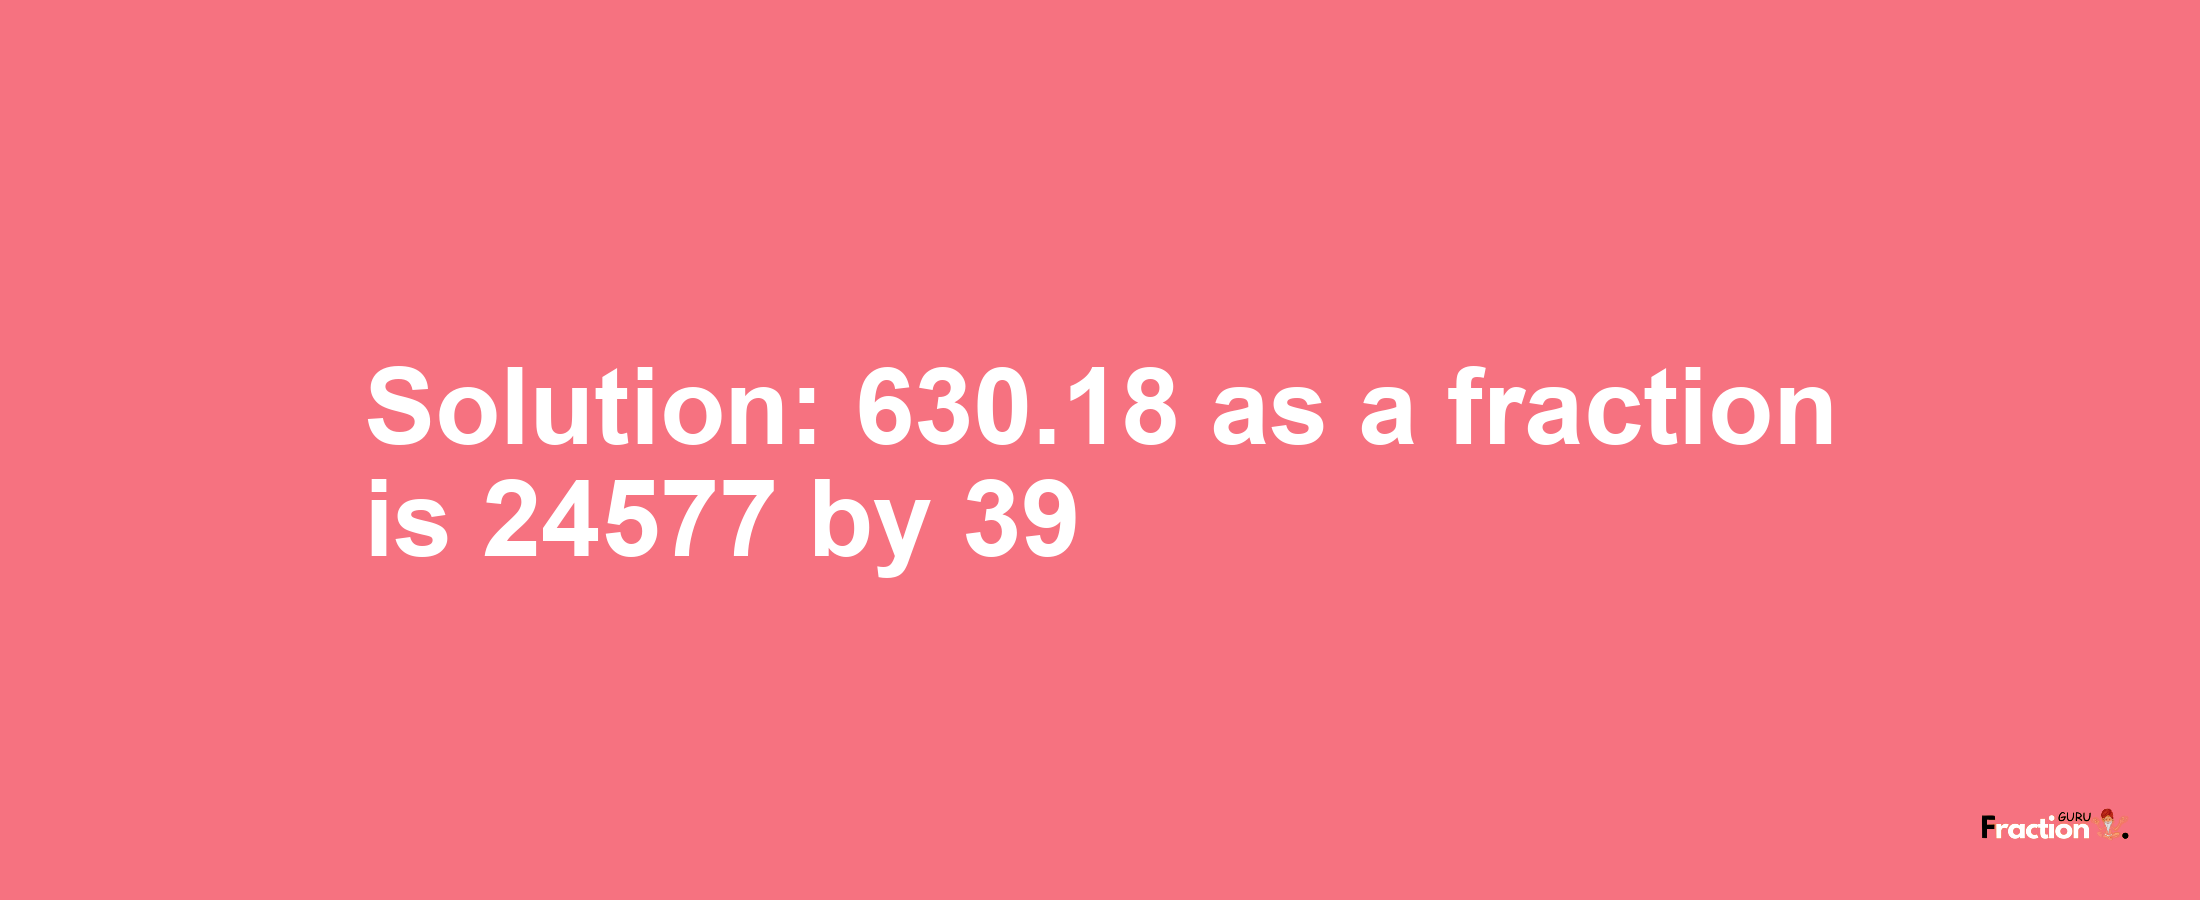 Solution:630.18 as a fraction is 24577/39